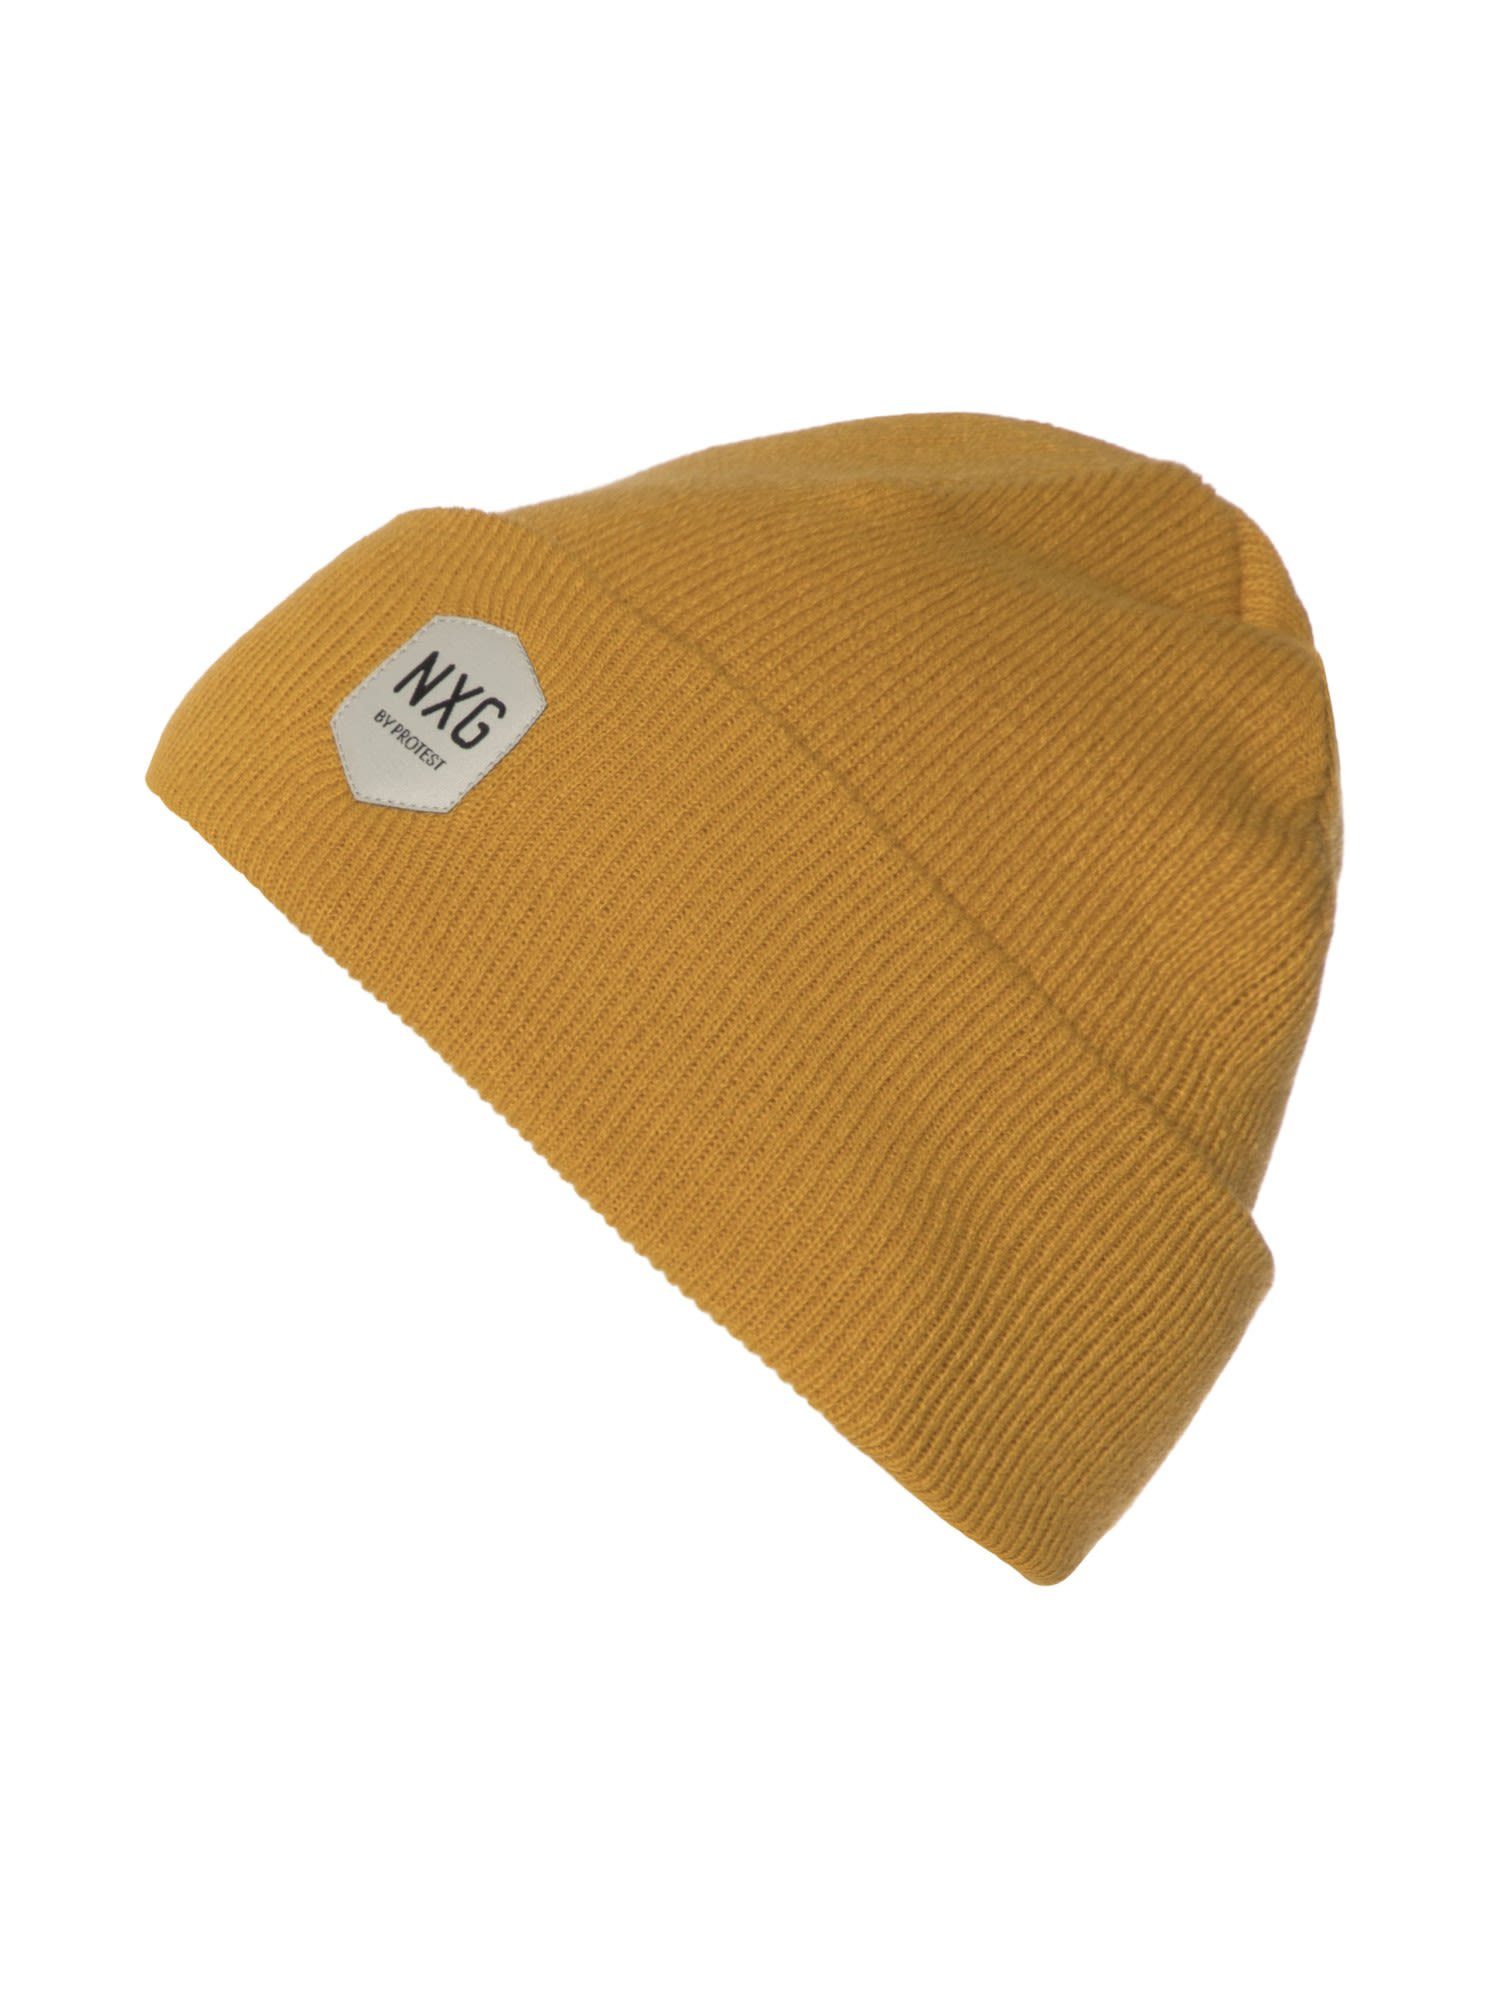 Protest Beanie Protest Nxg Rebelly Beanie Accessoires